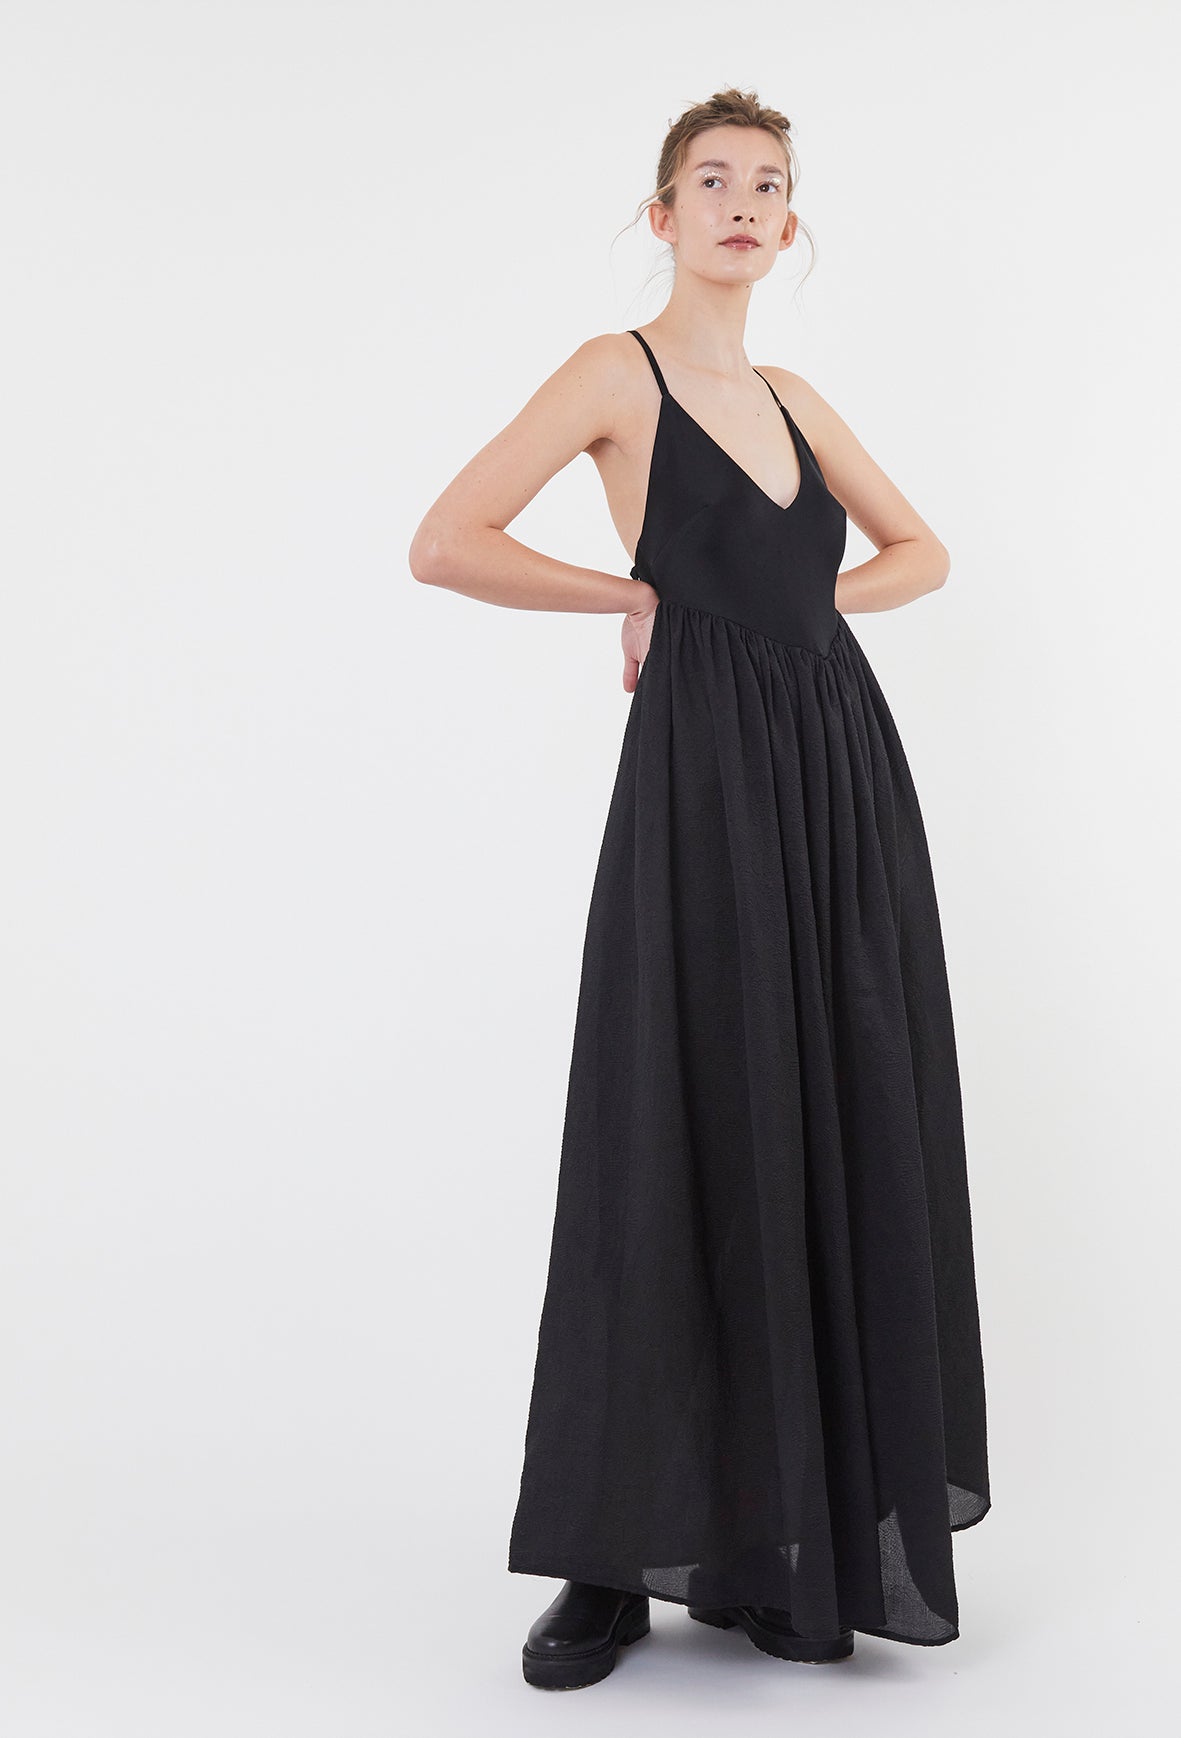 Glimmer Gown - Onyx Allure